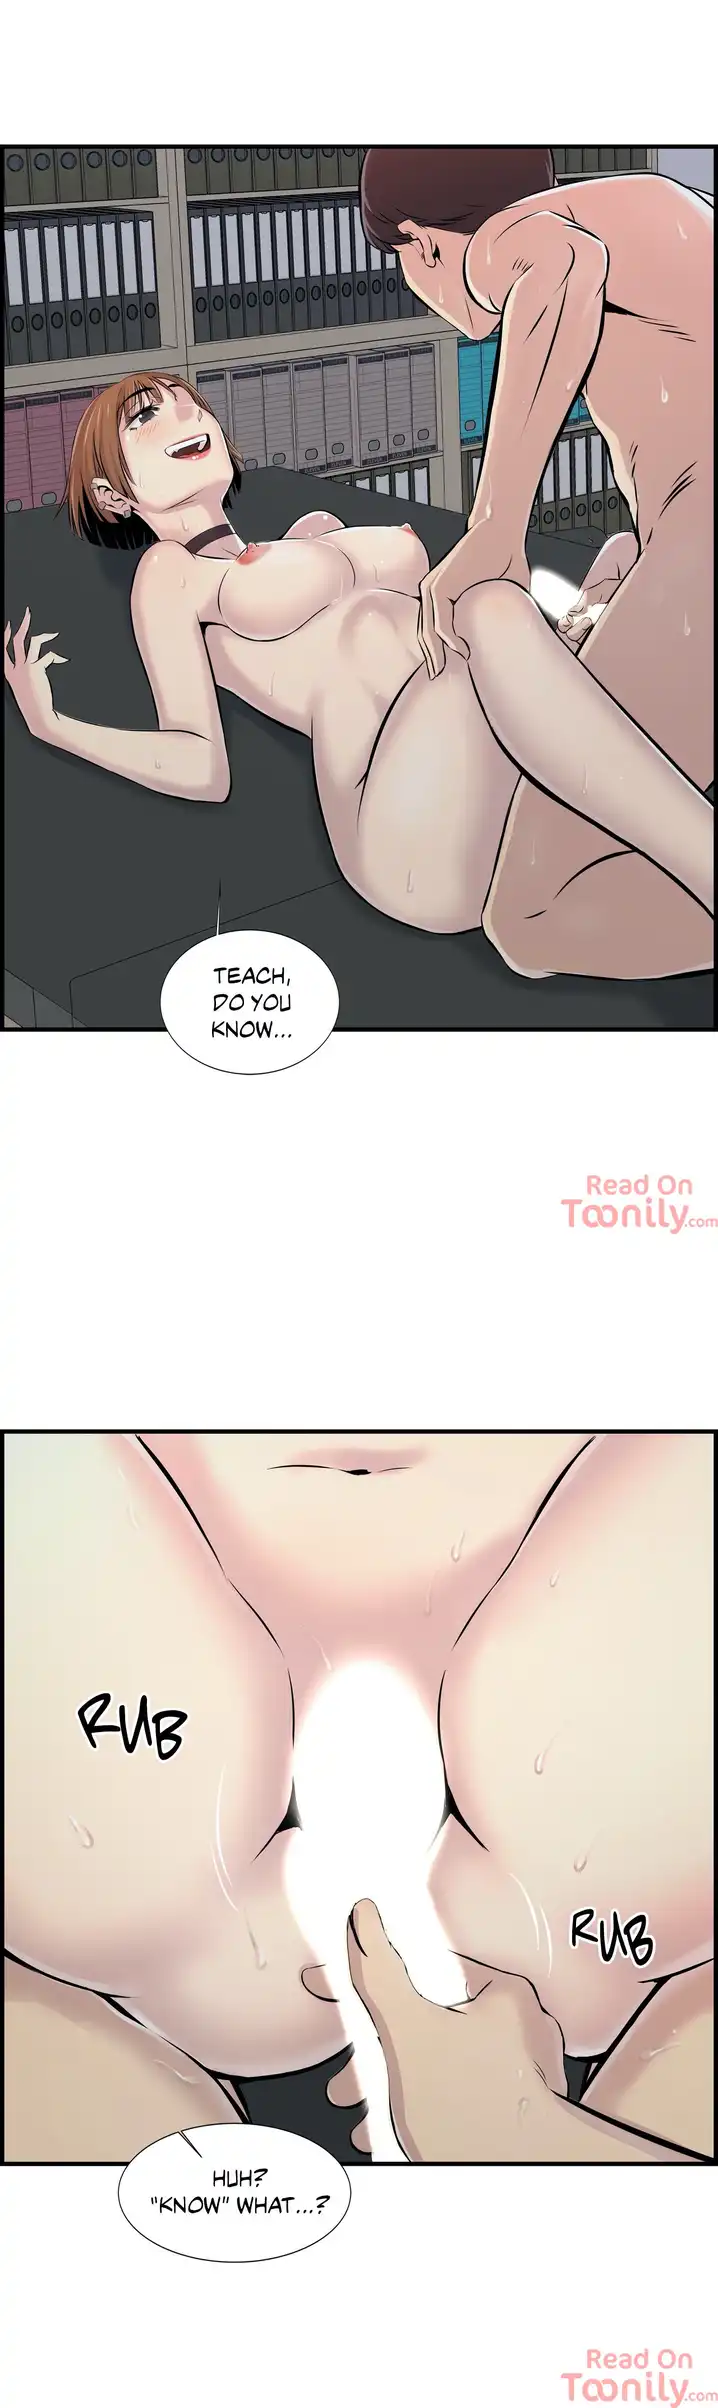 Cram School Scandal - Chapter 3 Page 8